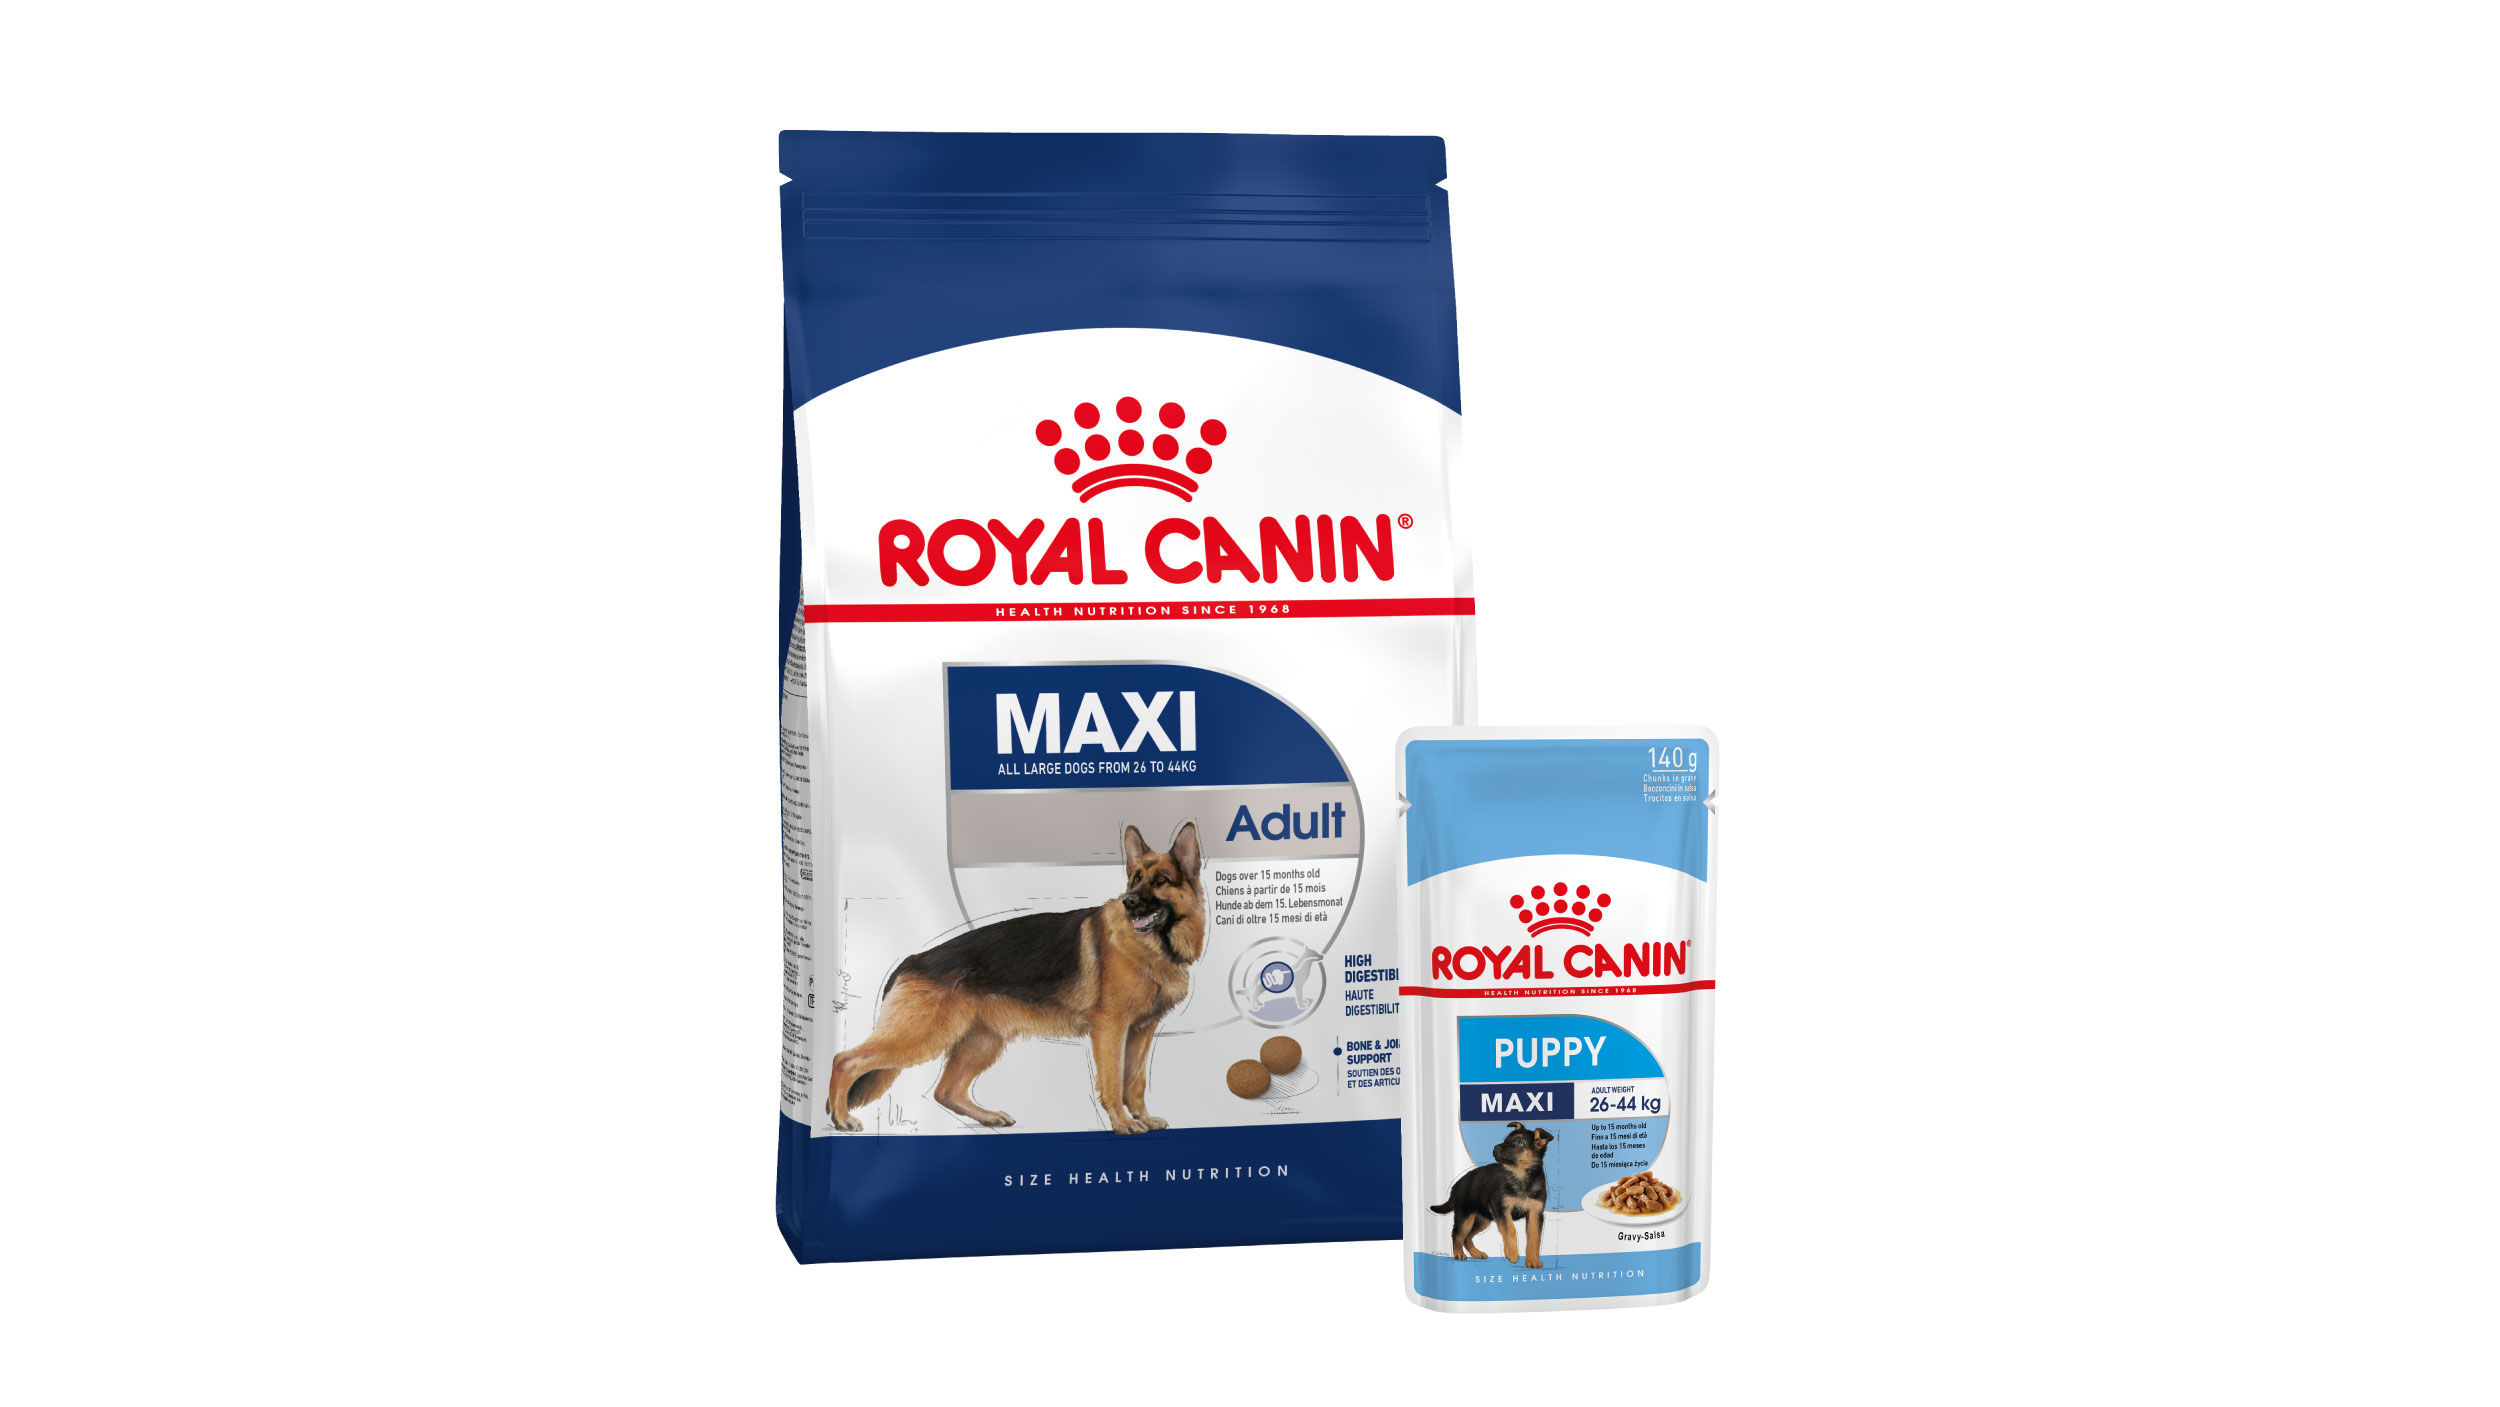 Maxi adult and large puppy product pack